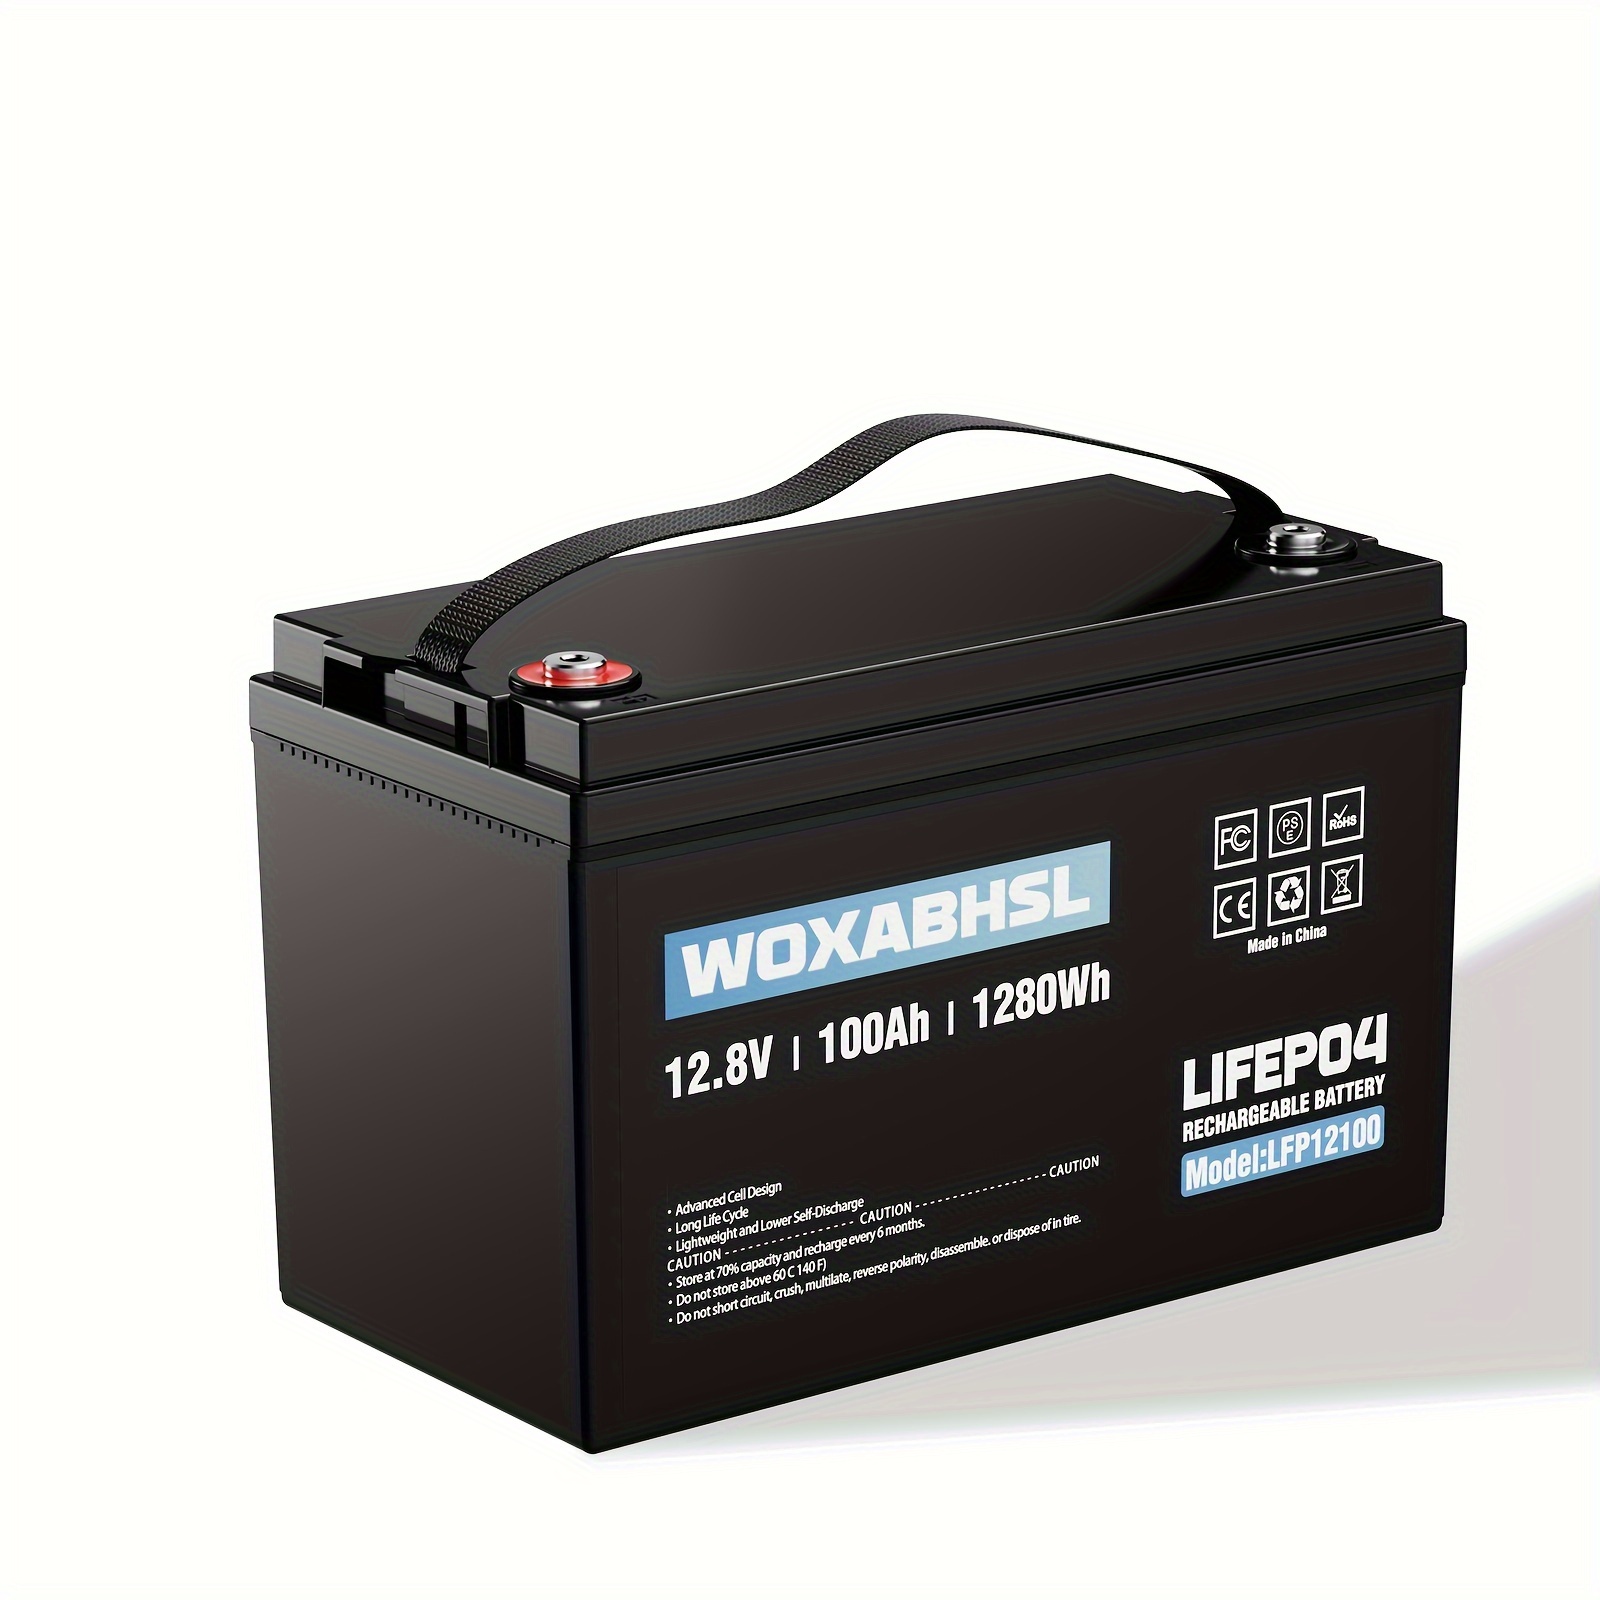 

12v 100ah Lifepo4 Lithium Battery, 4000+ Cycles Lithium Iron Phosphate Rechargeable Battery For Solar, Rv, Marine, Home Energy Storage, Off-grid Applications Built-in 100a Bms